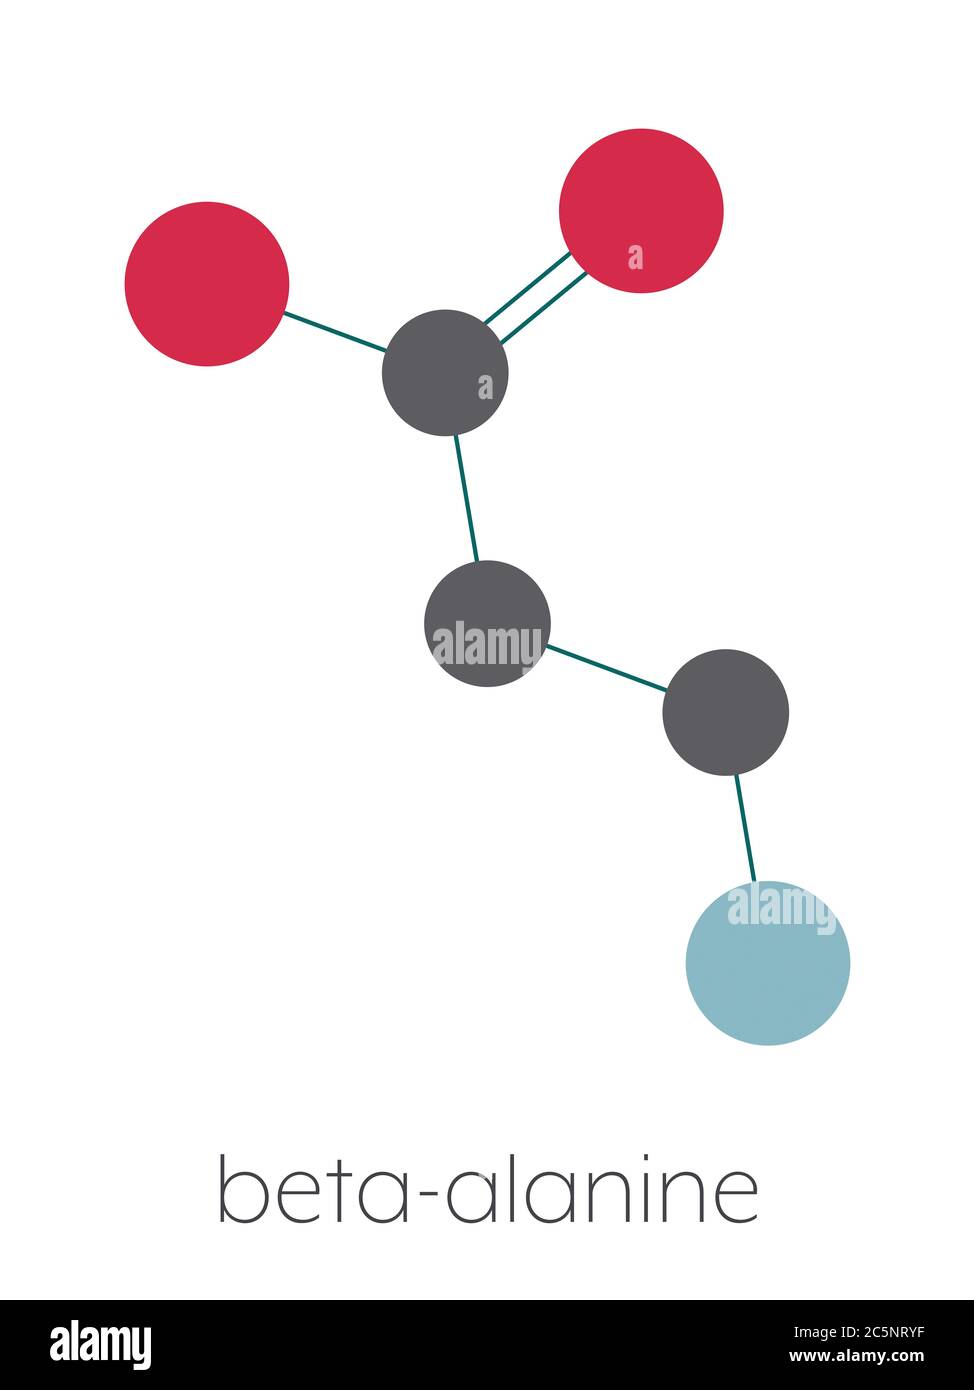 Beta-alanine molecule. Naturally occurring beta amino acid. Precursor of carnosine. Athletes often use beta-alanine supplements. Stylized skeletal formula (chemical structure): Atoms are shown as color-coded circles: hydrogen (hidden), carbon (grey), nitrogen (blue), oxygen (red). Stock Photo